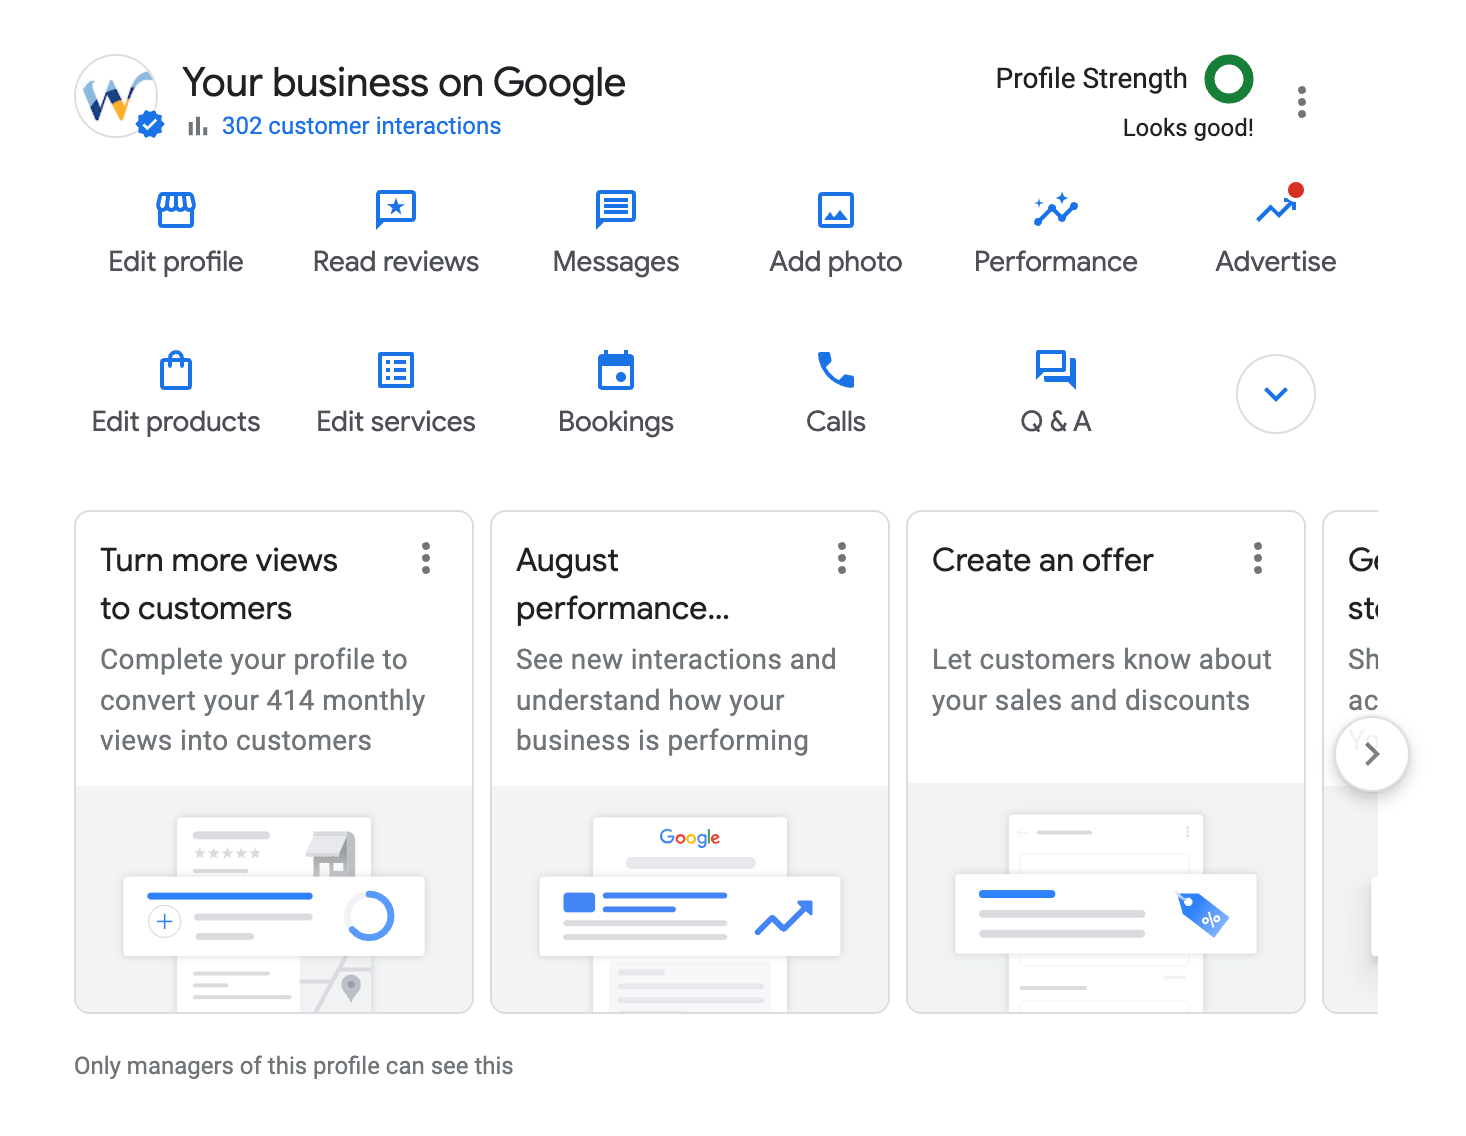 Manage your Google Business Profile from your browser